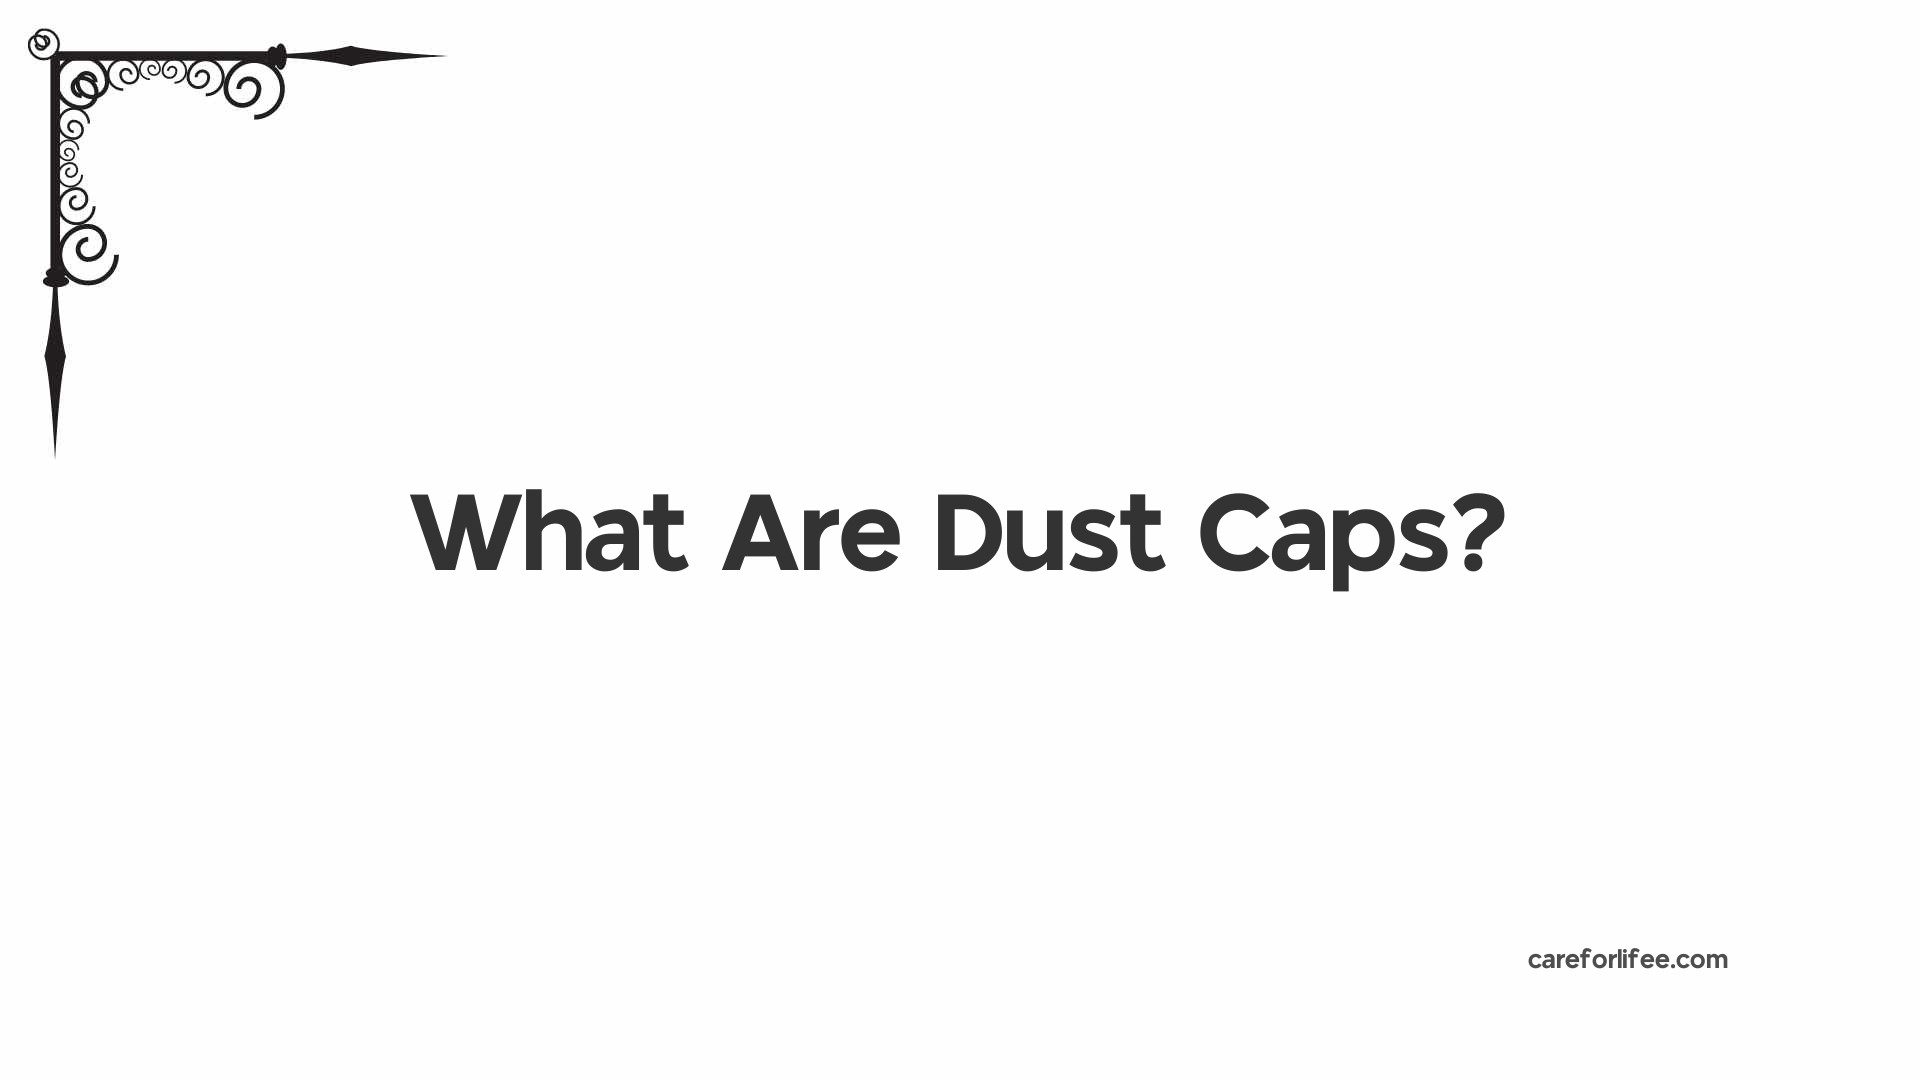 What Are Dust Caps?